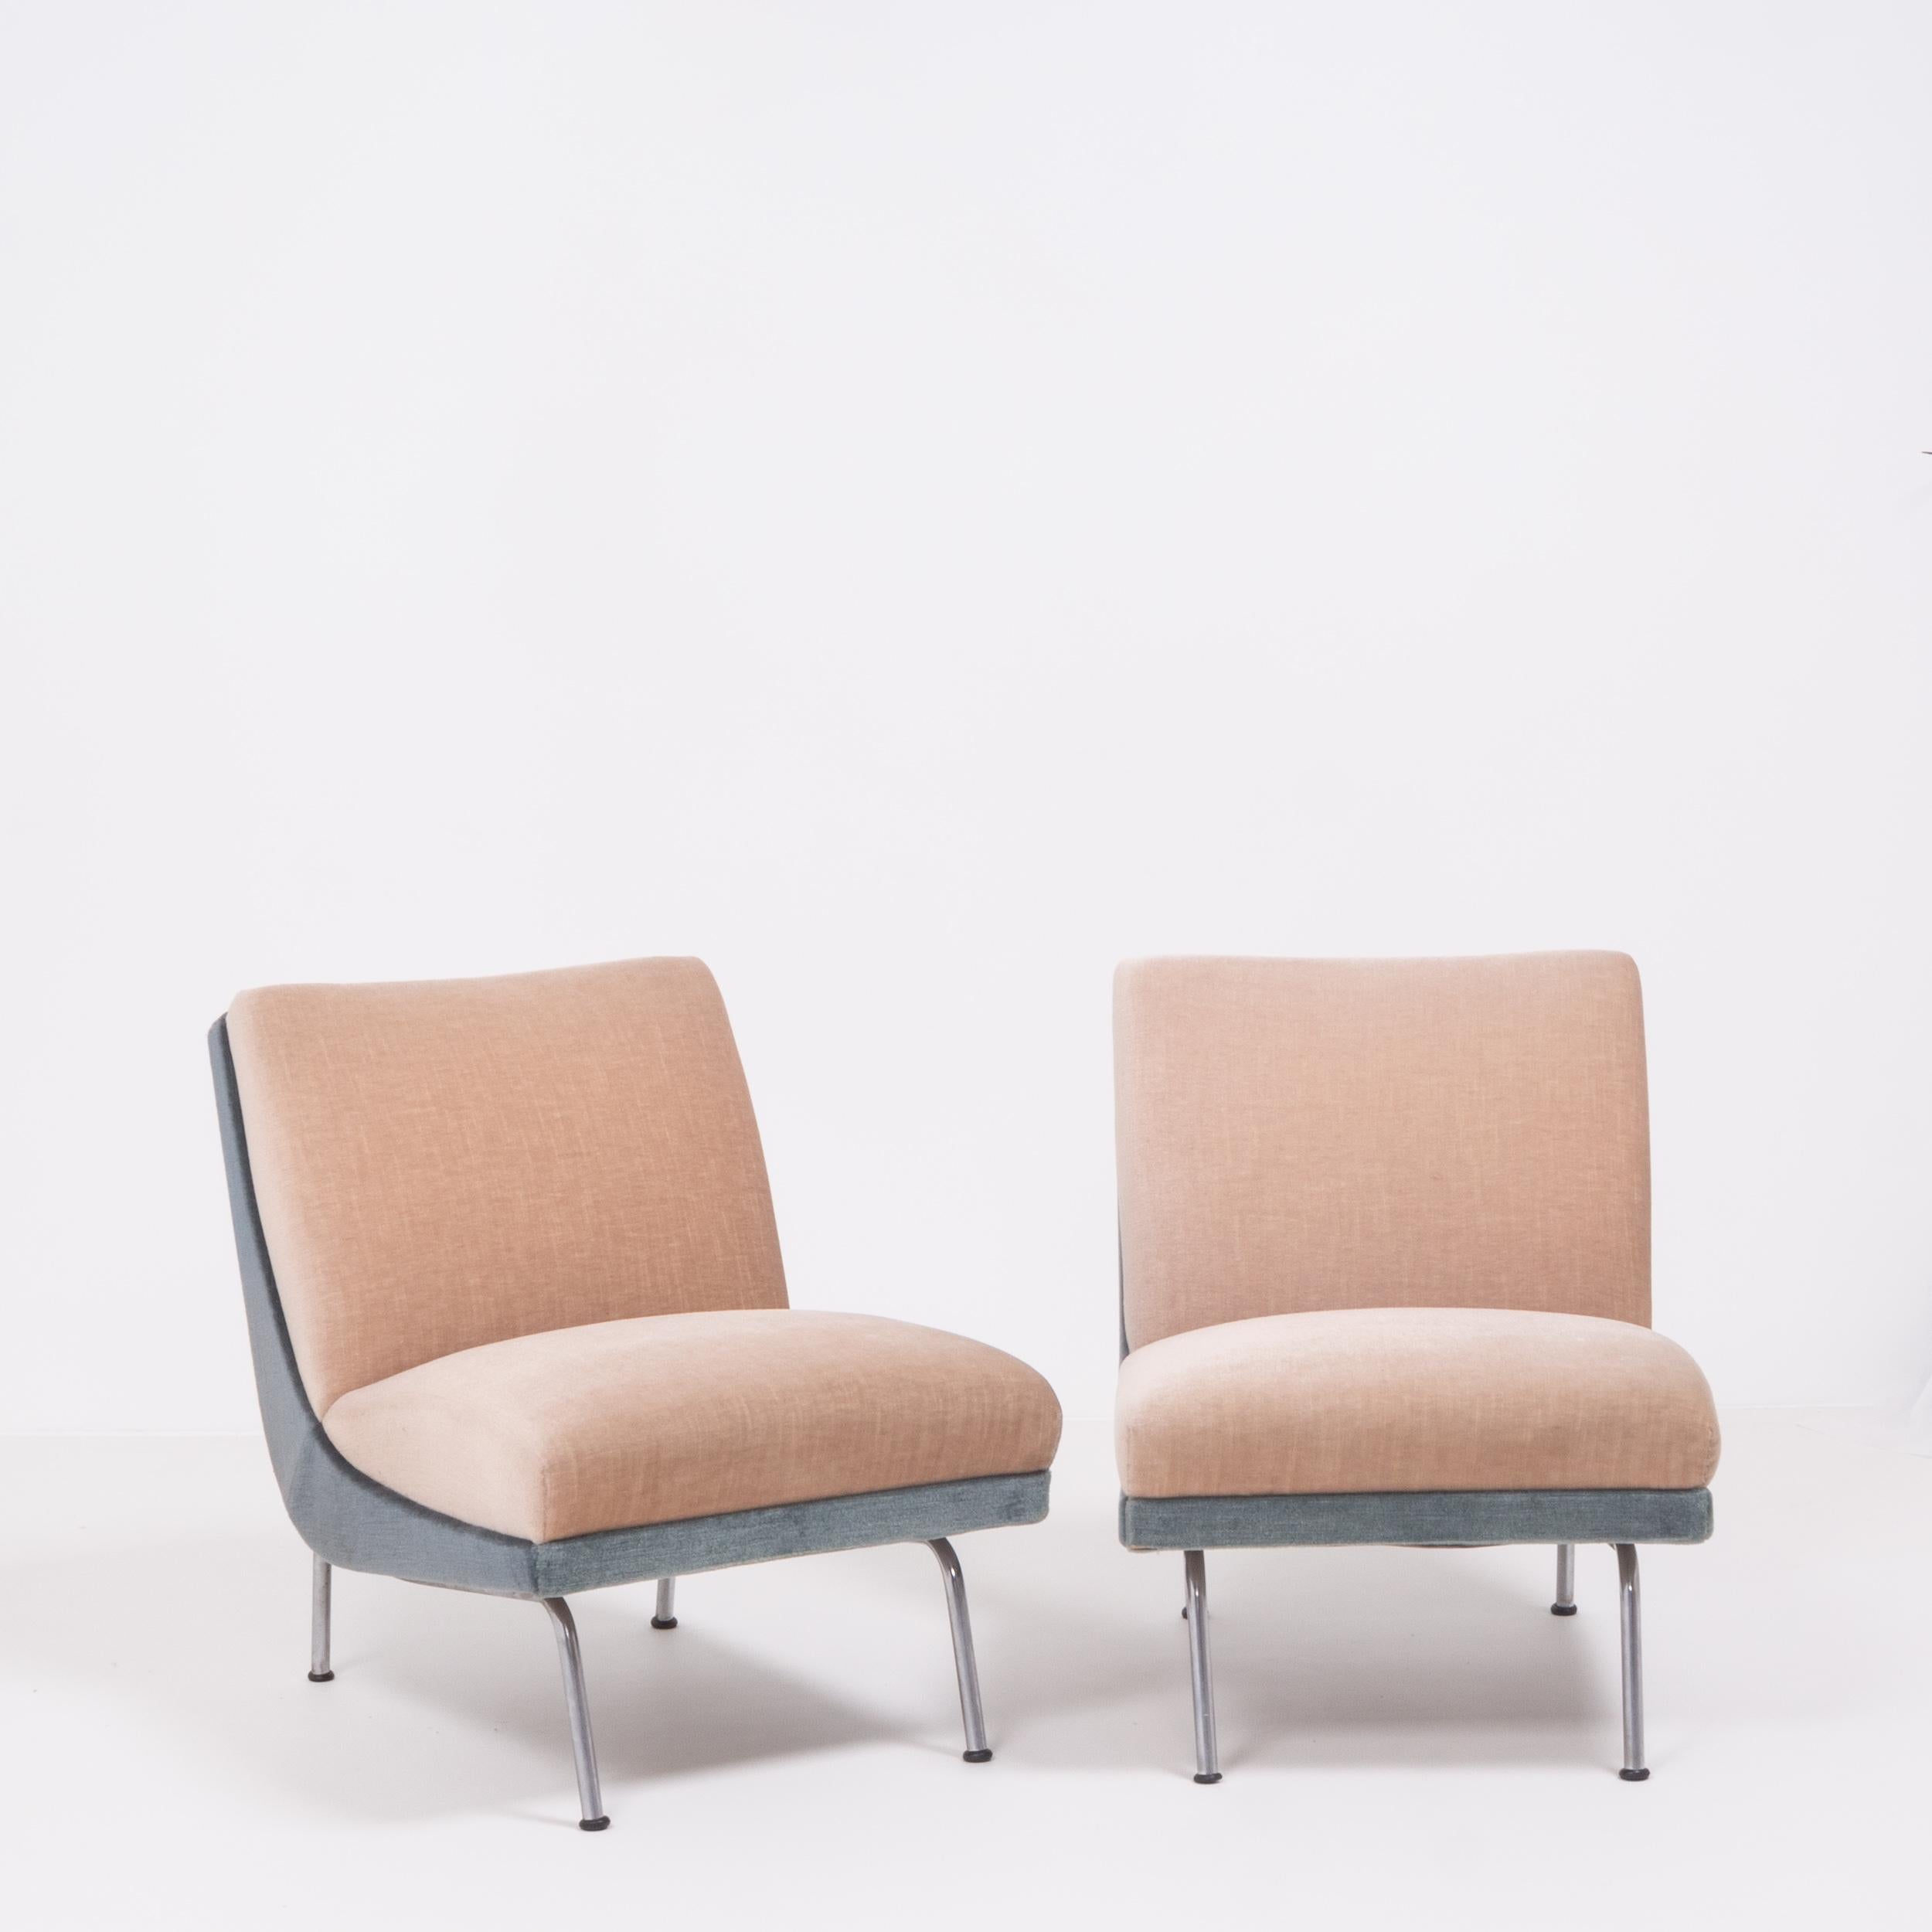 A beautifully designed pair of midcentury lounge chairs in two-tone mohair, manufactured in France.

Upholstered in sea foam green and taupe mohair, the chairs have a curved chrome frame and legs with black rubber foot protectors.